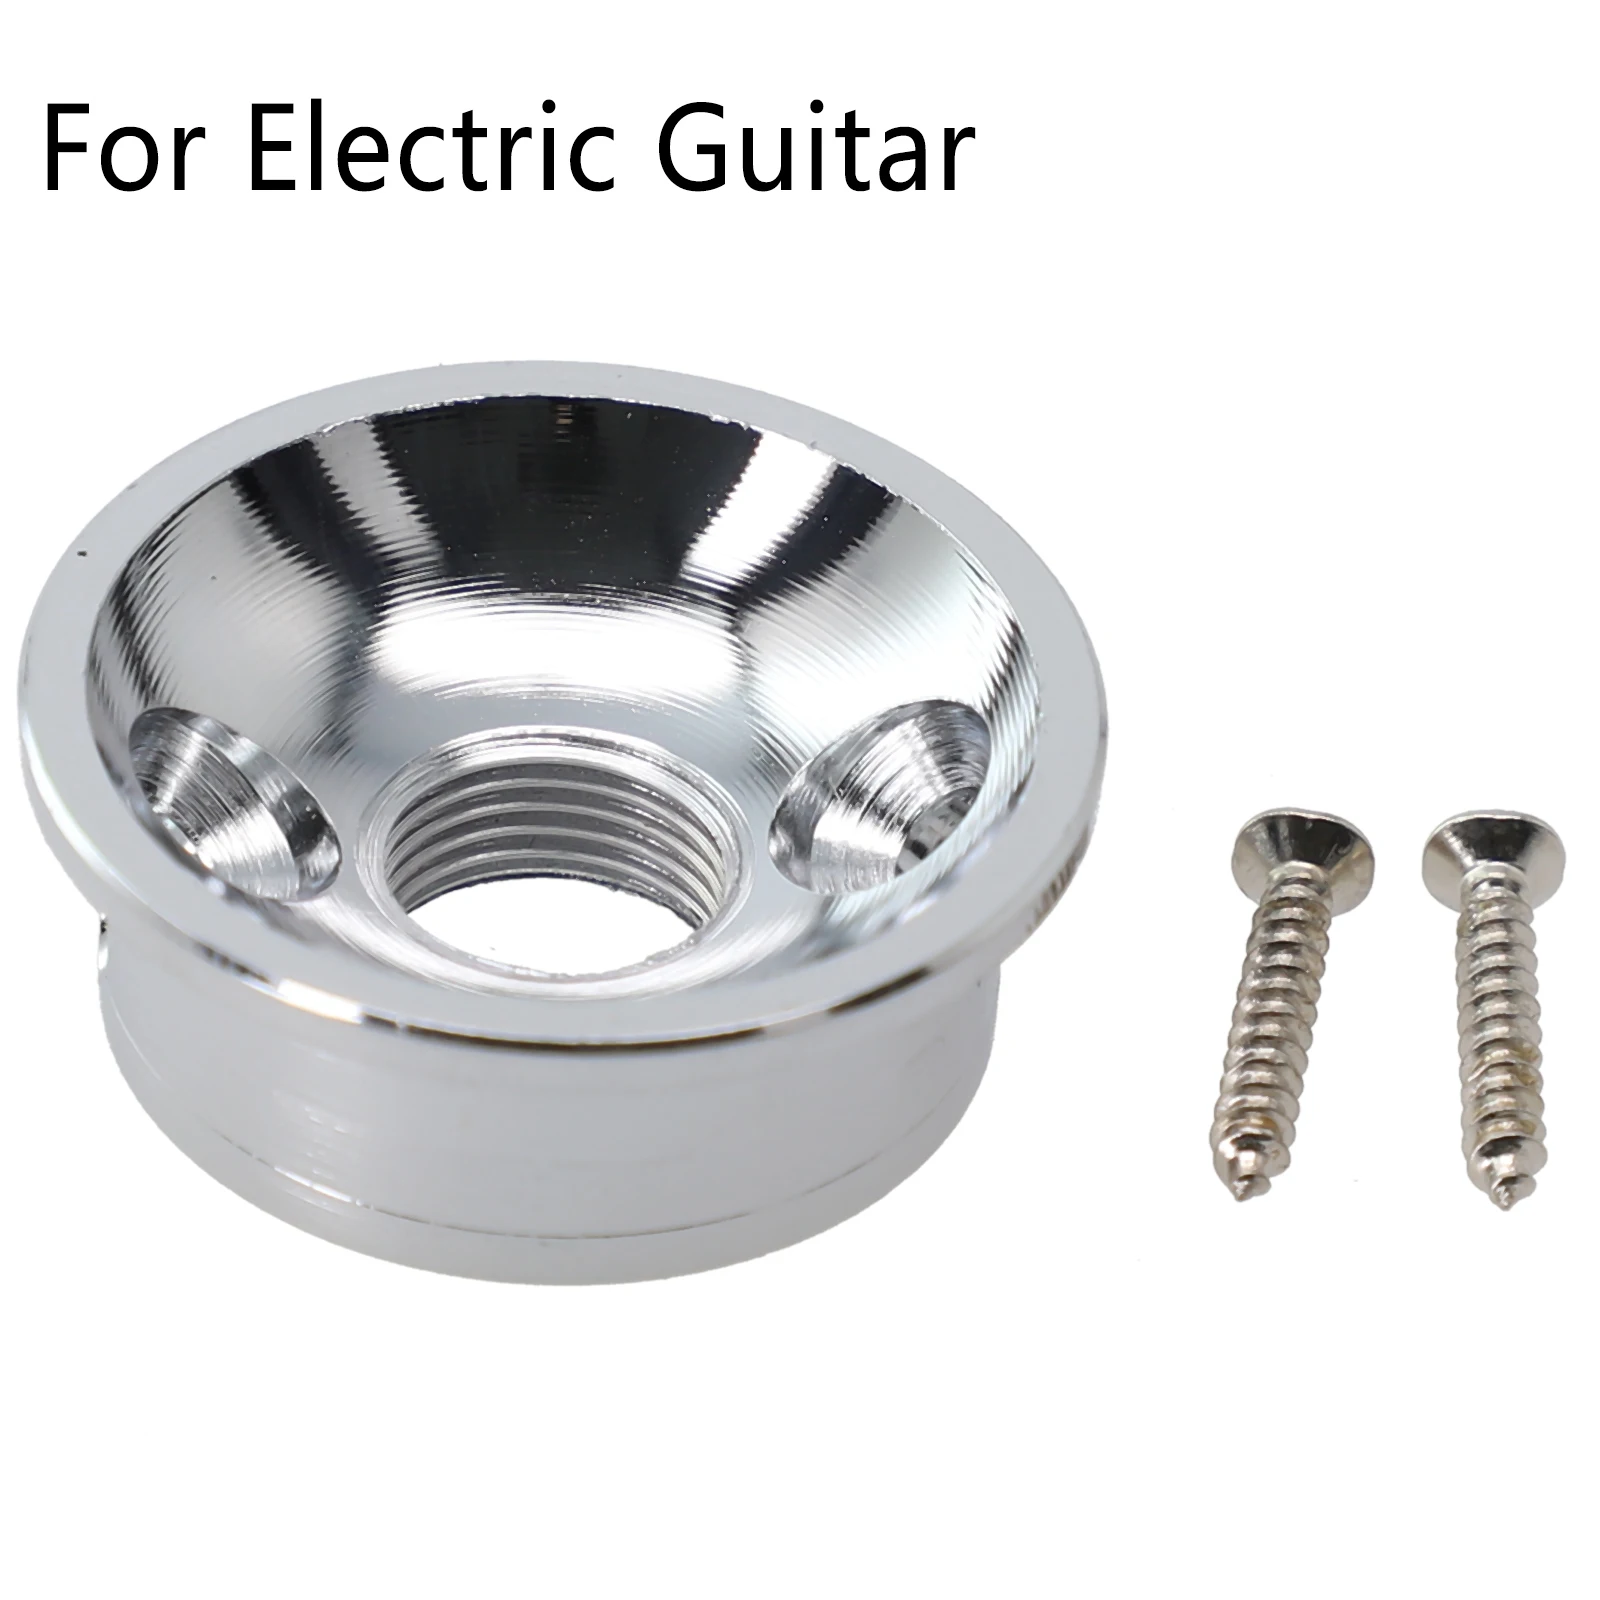 

Professional Guitar Socket Plate Metal Construction Perfect For Telecaster Upgrade Improve Your Playing Experience